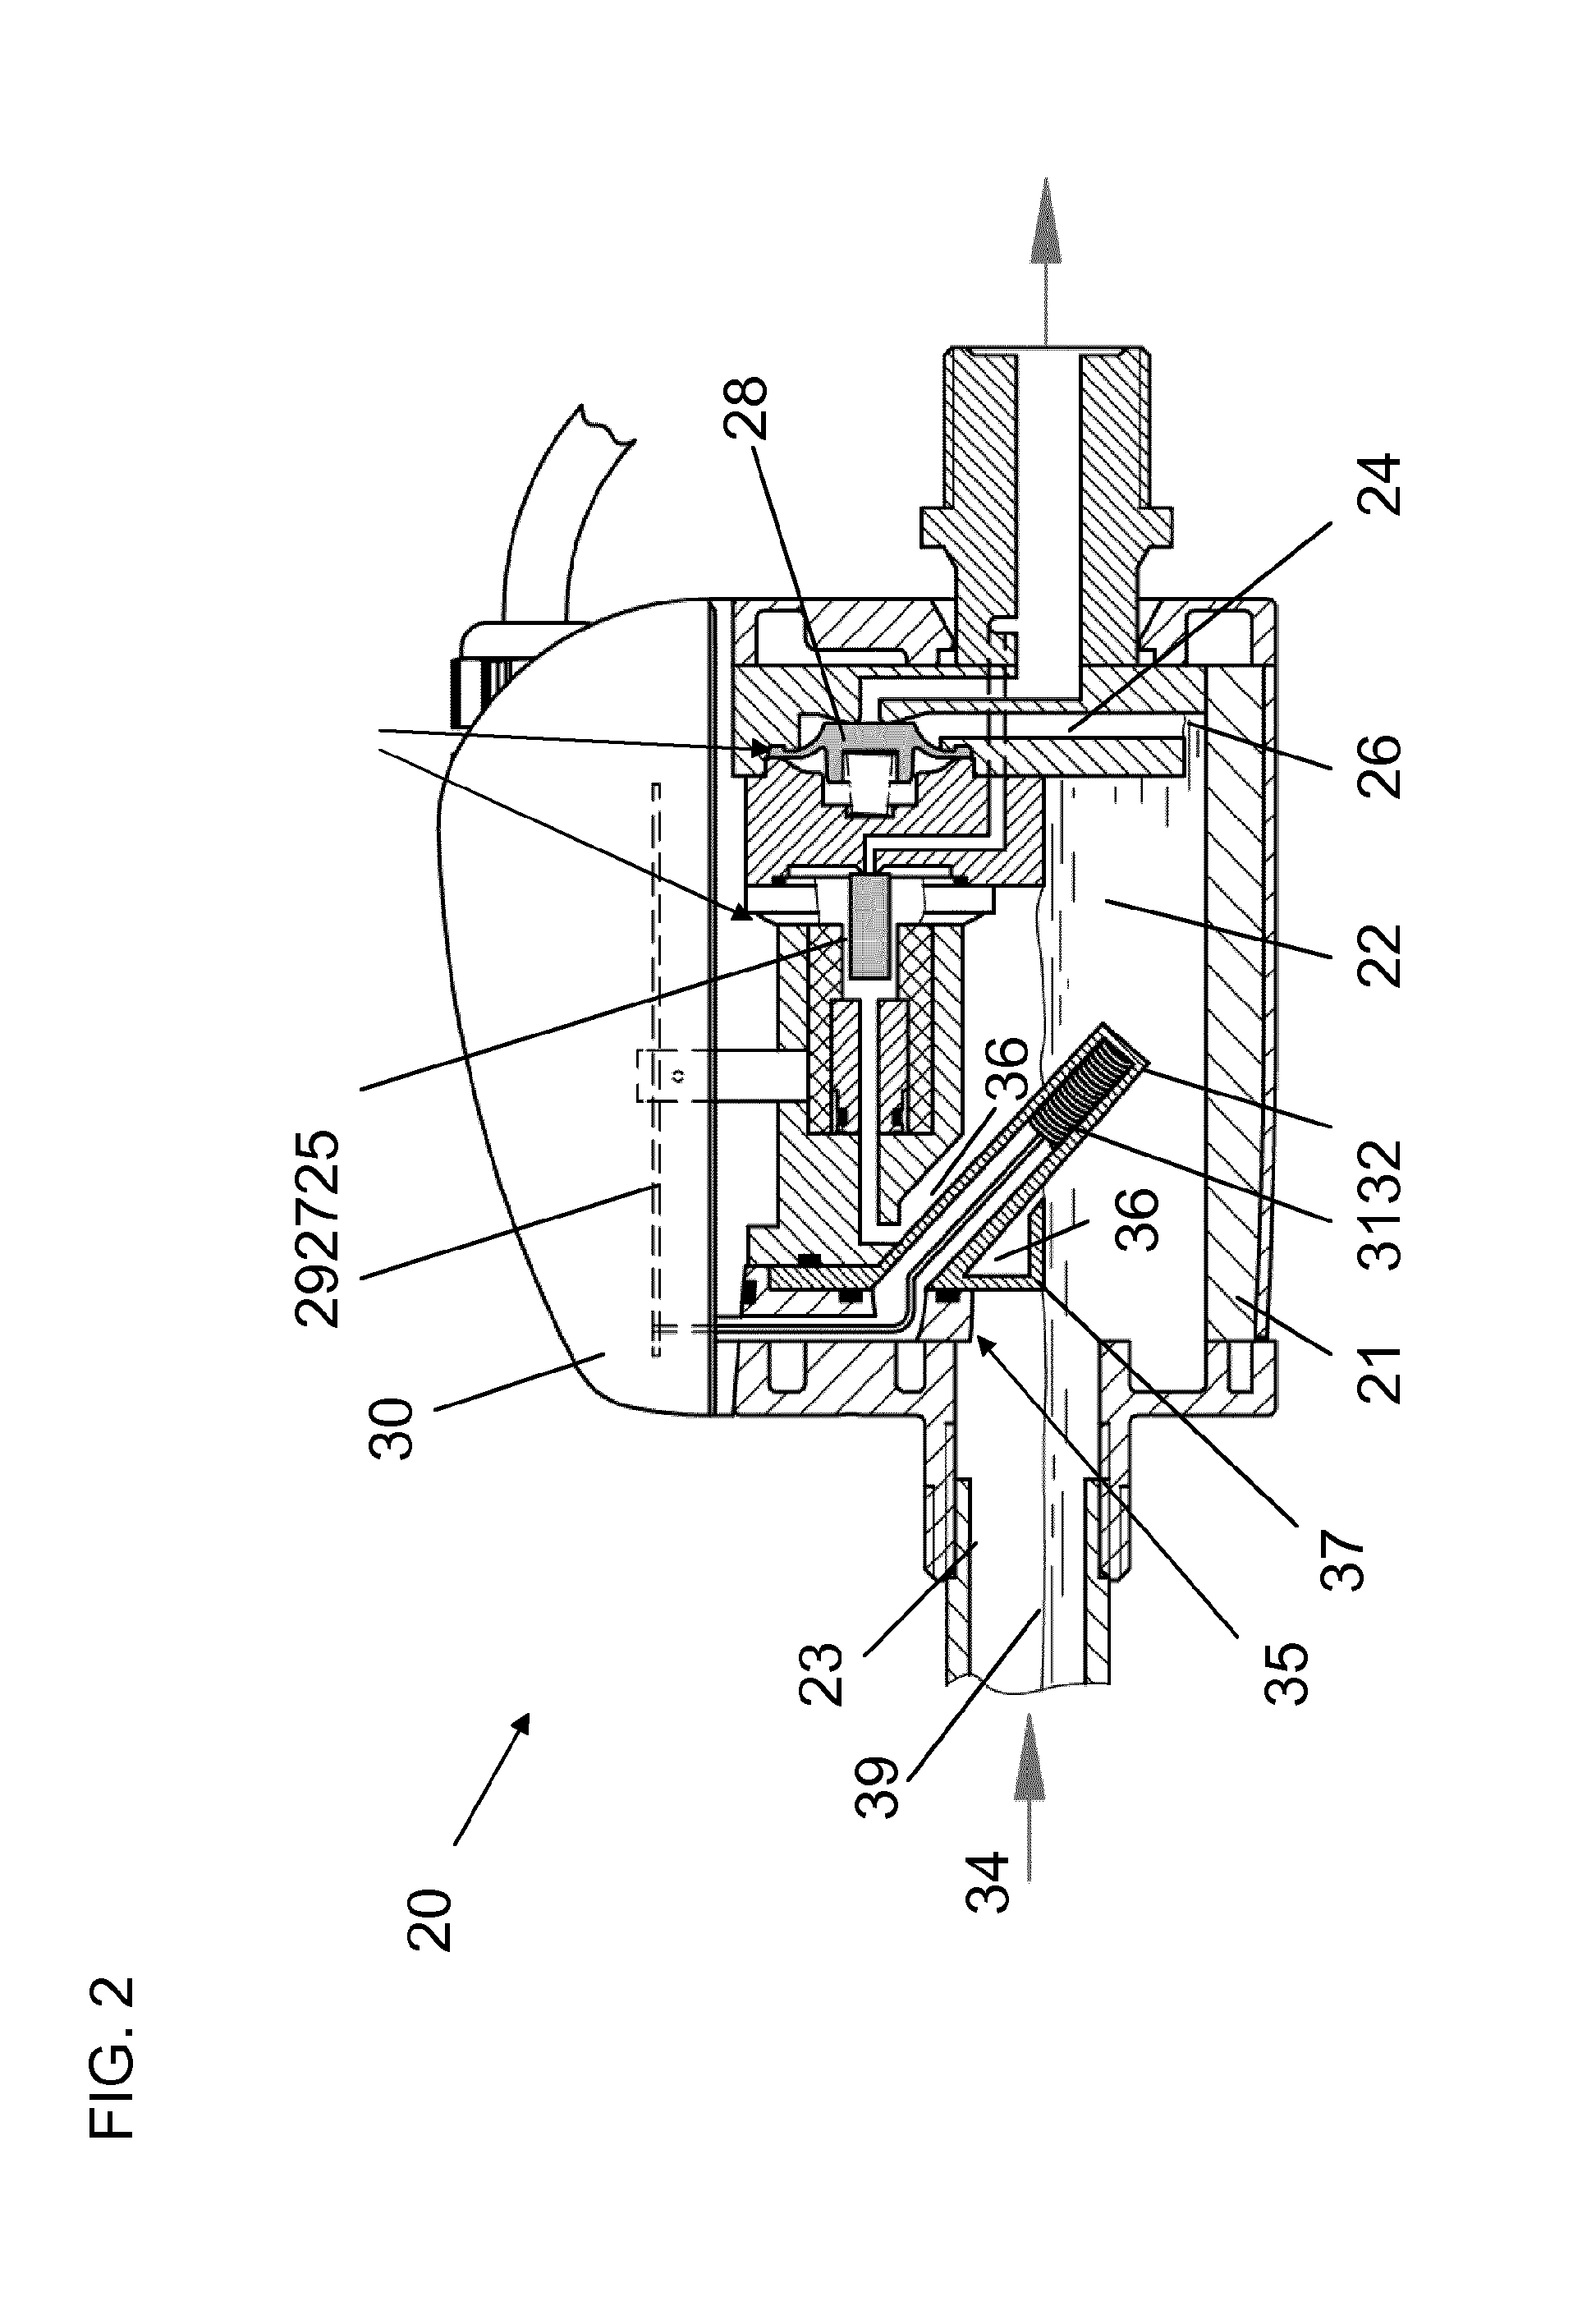 Condensate discharge device for compressed gas systems